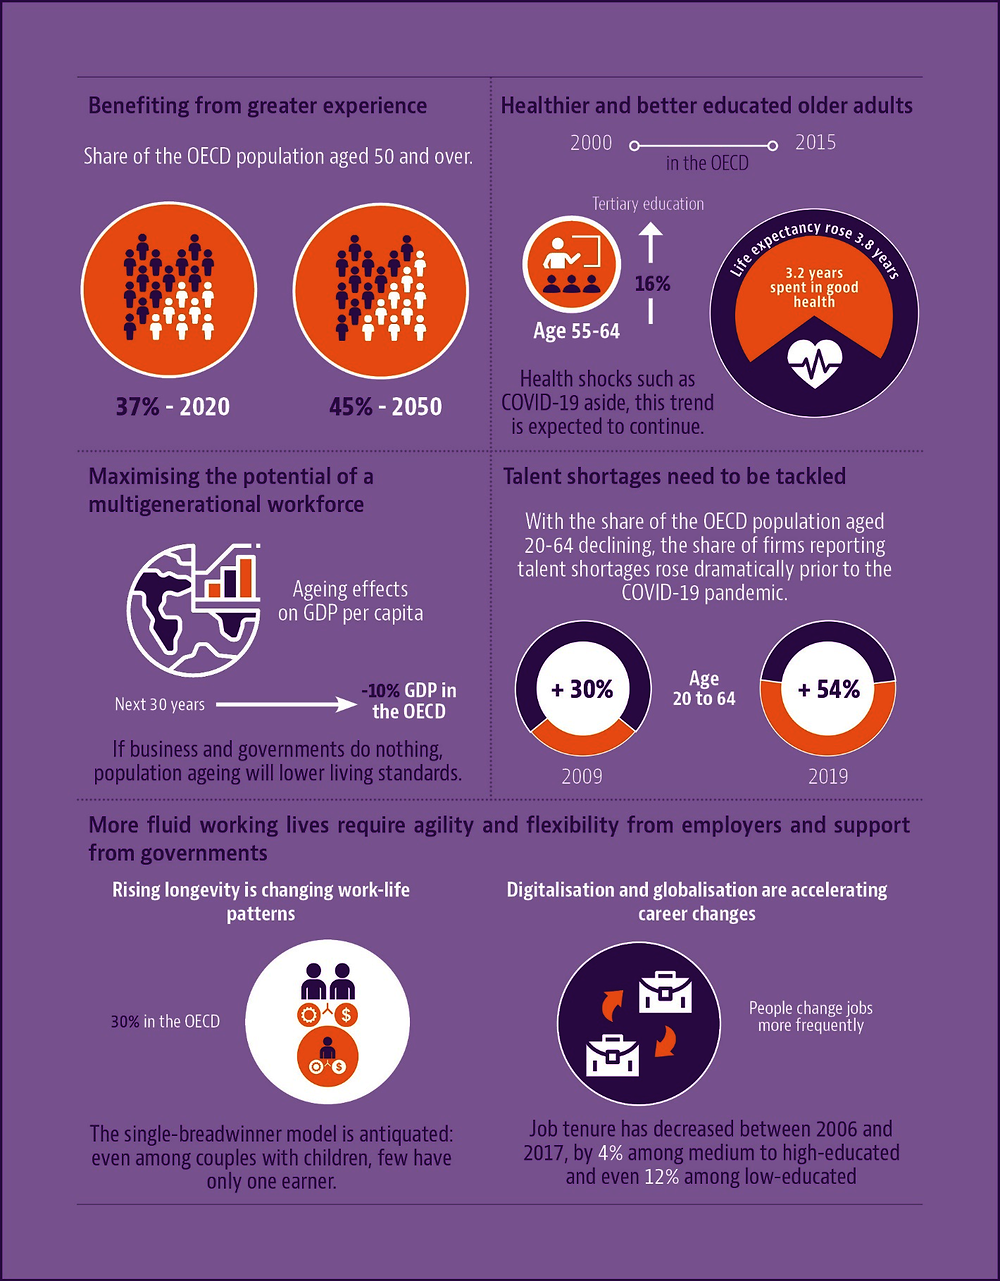 Infographic 1.1. Key facts: The future workforce will be more age-diverse, healthier and better educated